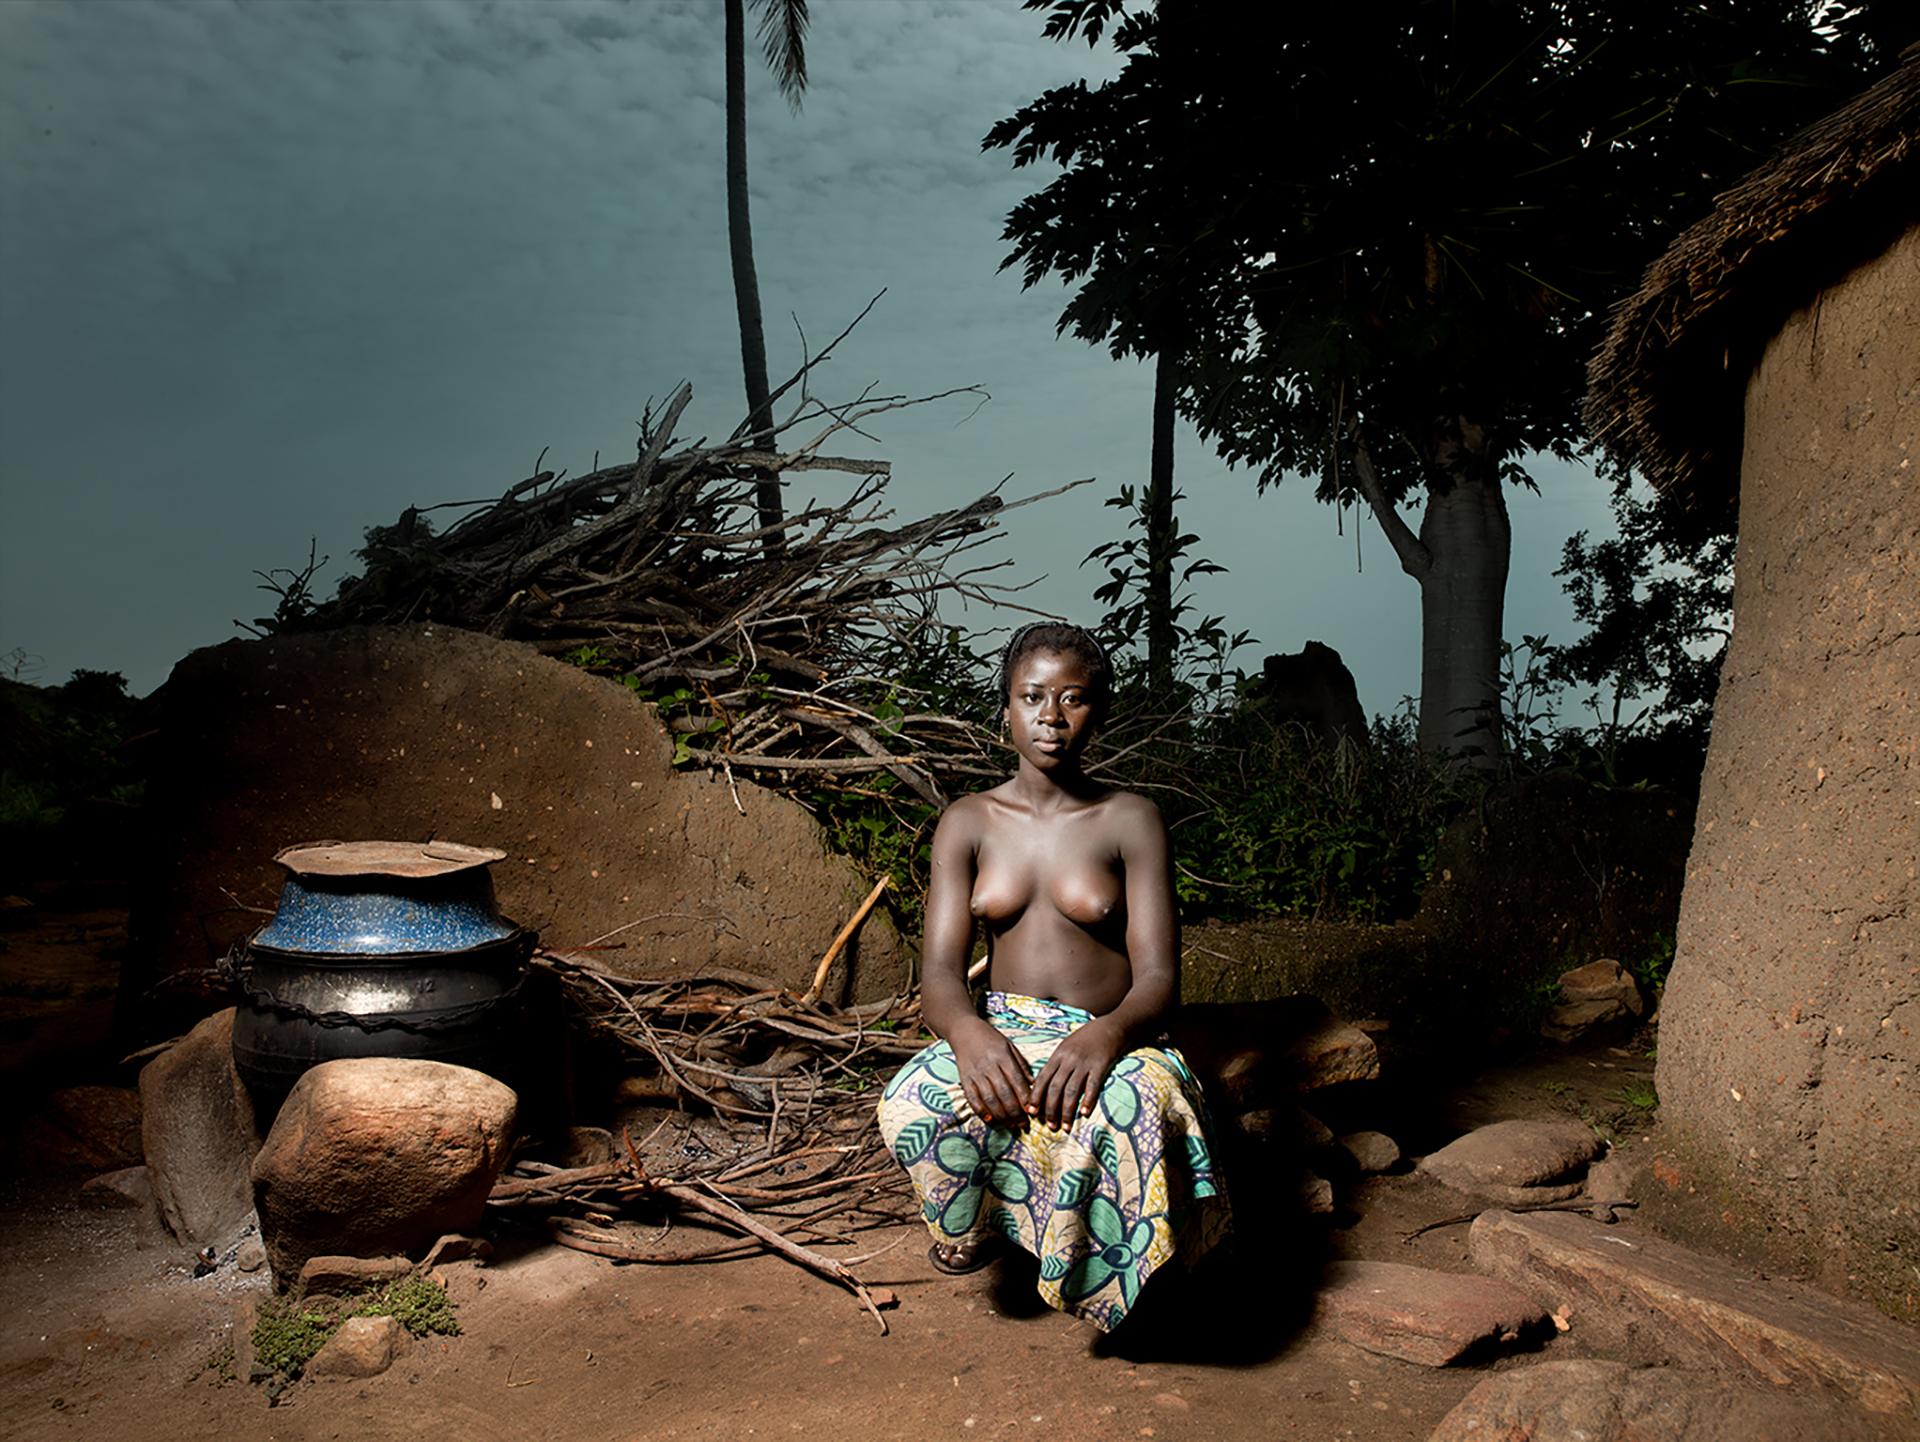 New York Photography Awards Winner - Alone in the Village